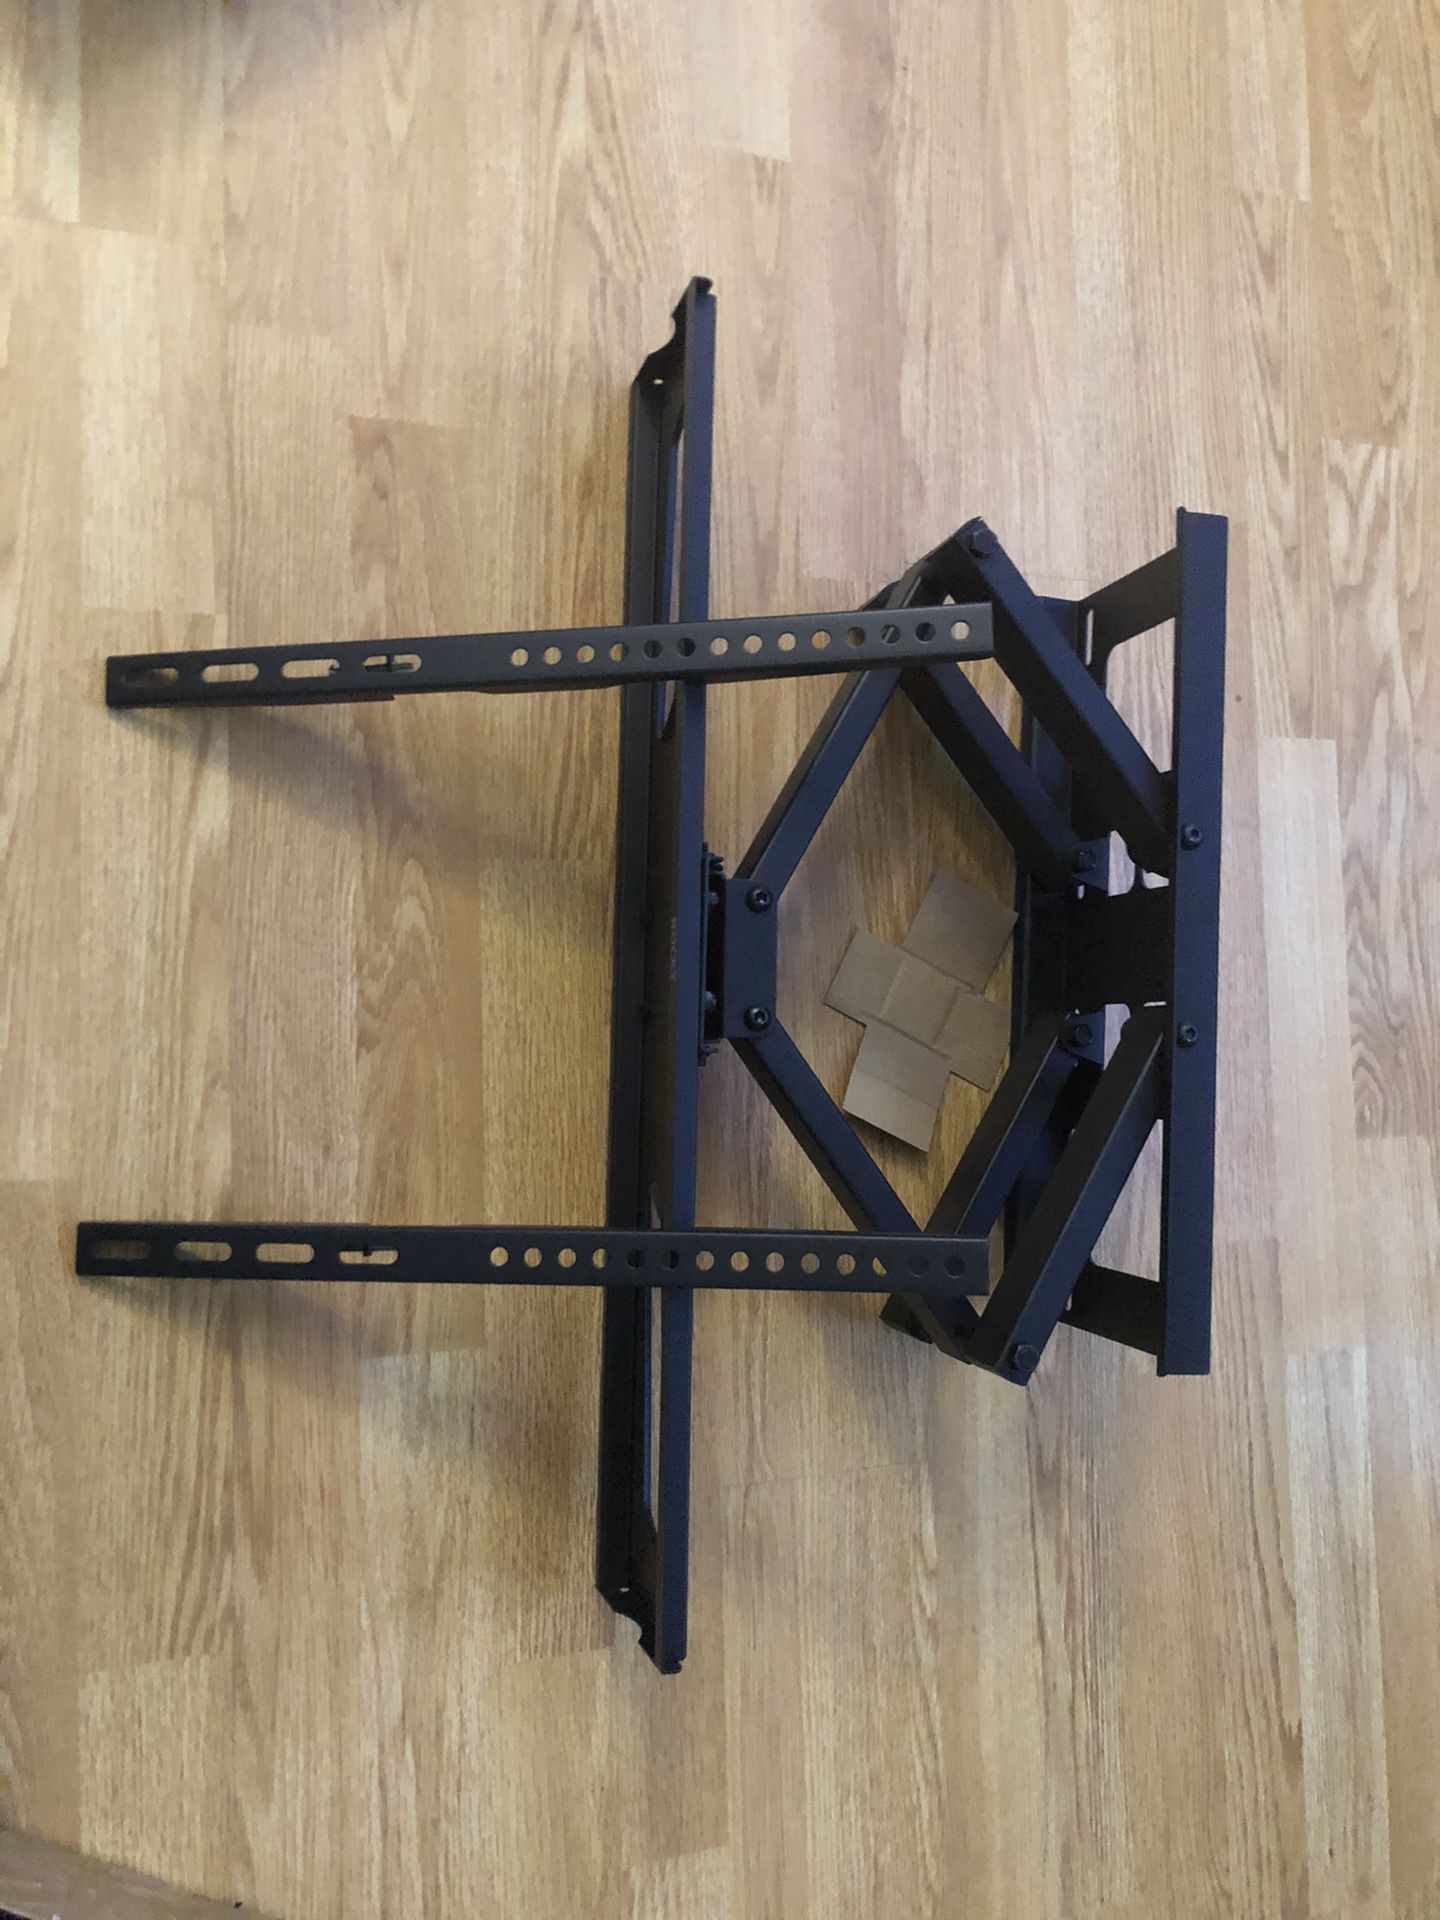 New full motion tv wall mount fits up to 85 inches